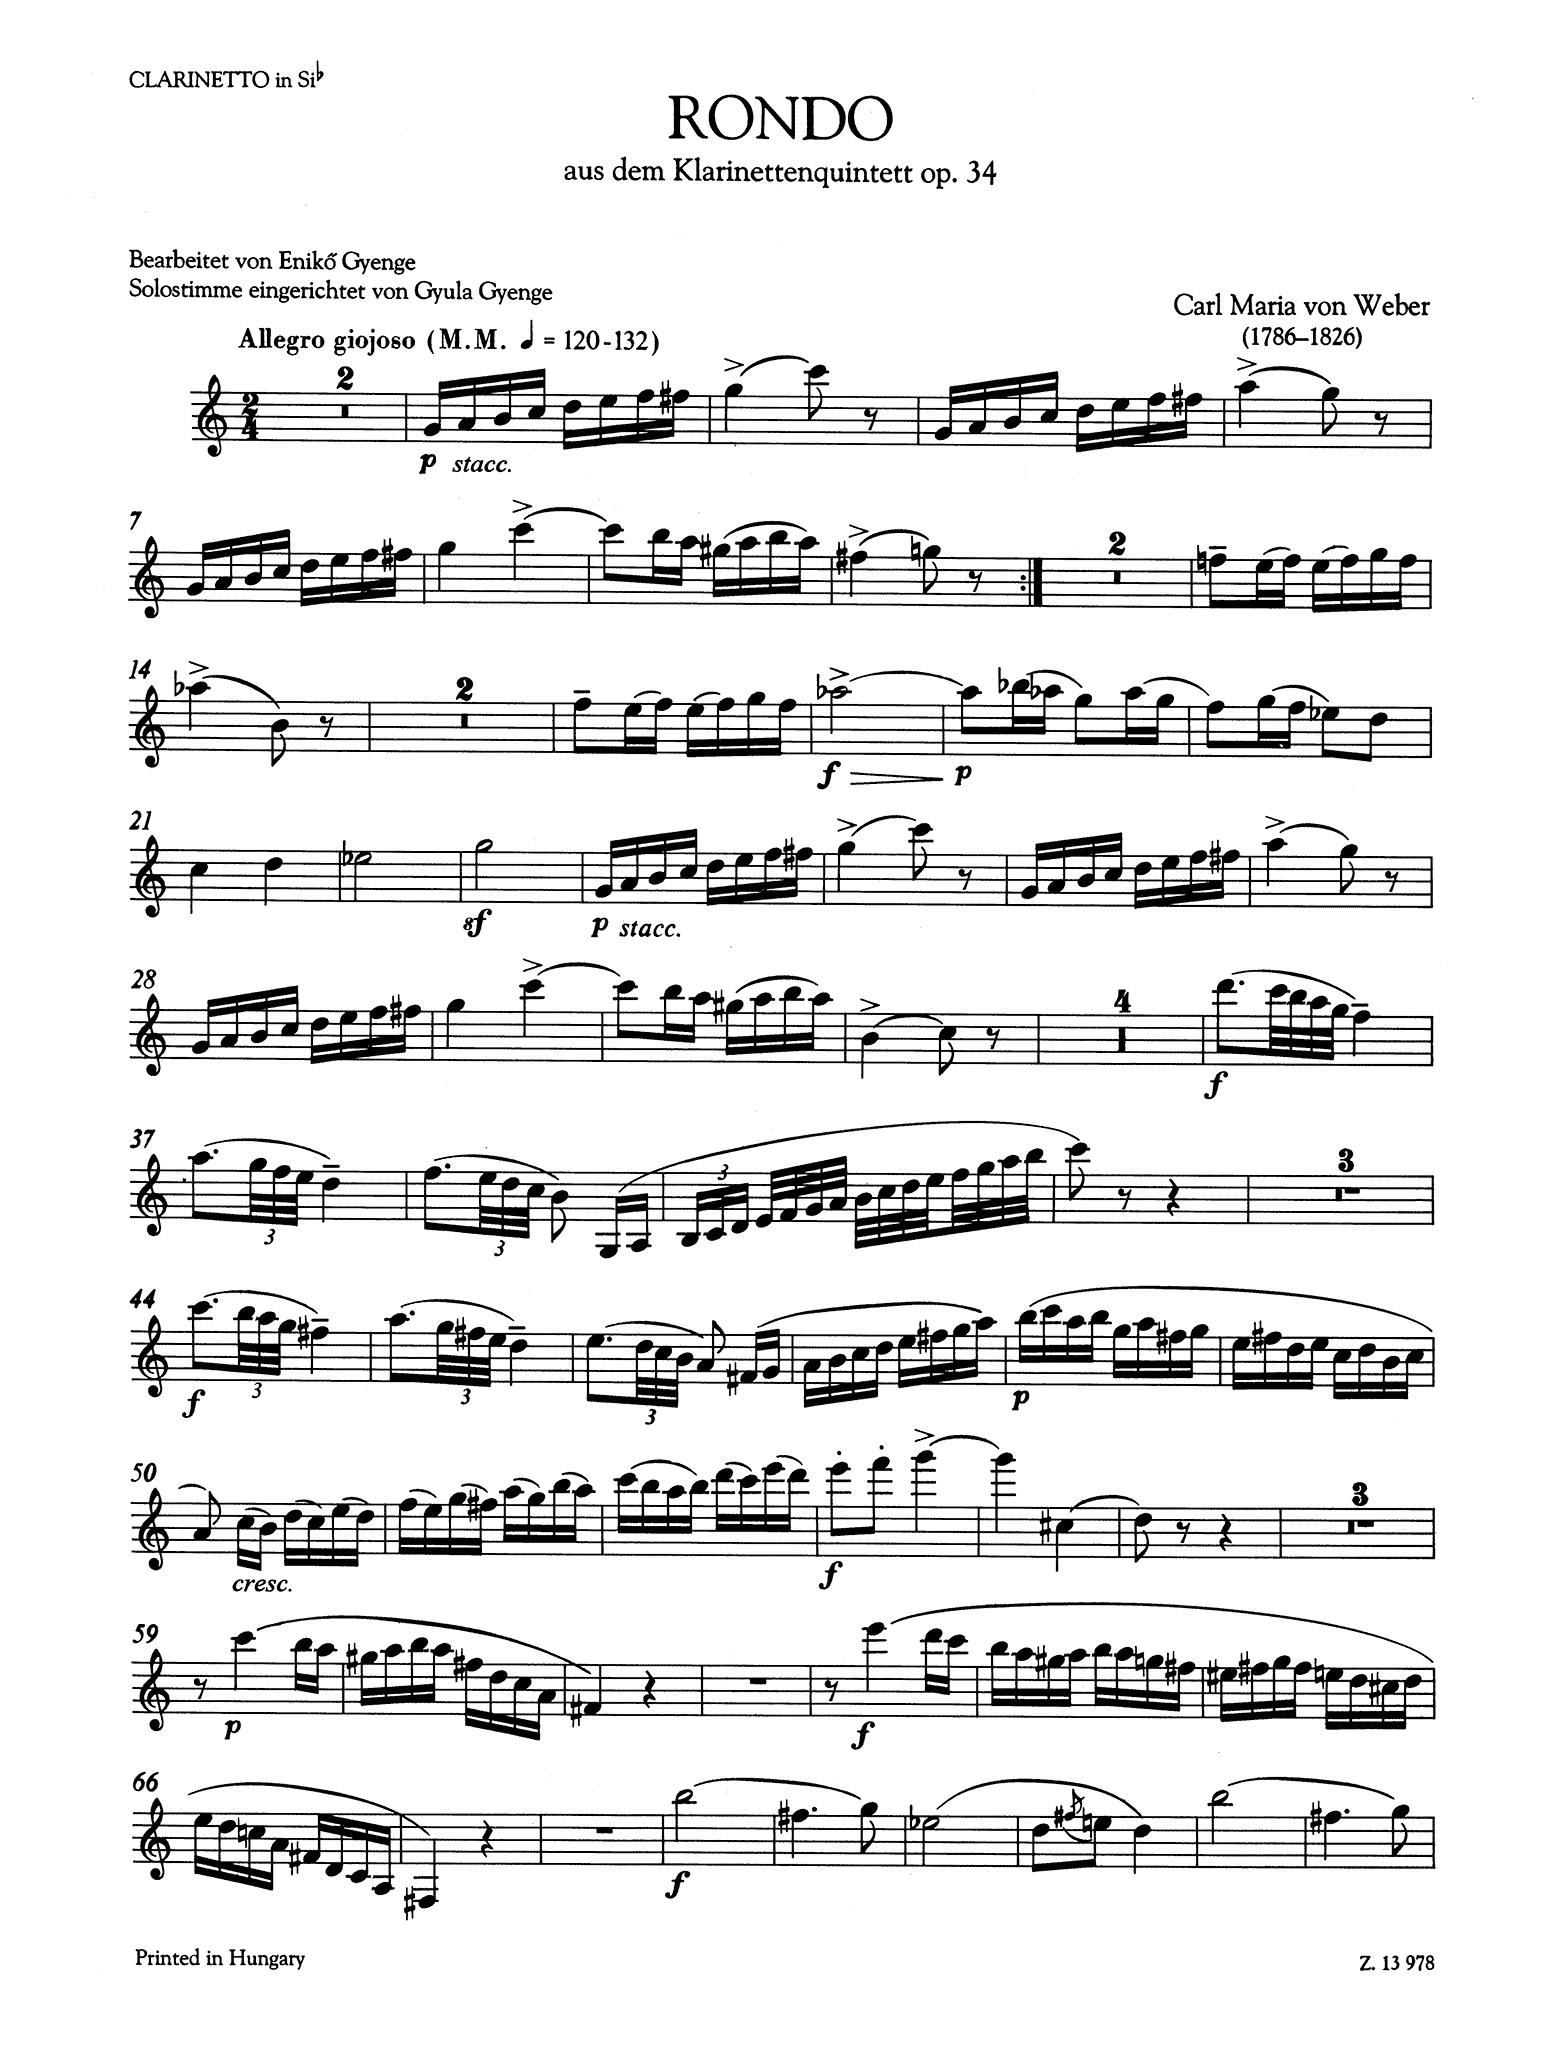 Weber Rondo, from Quintet, Op. 34 piano reduction clarinet part